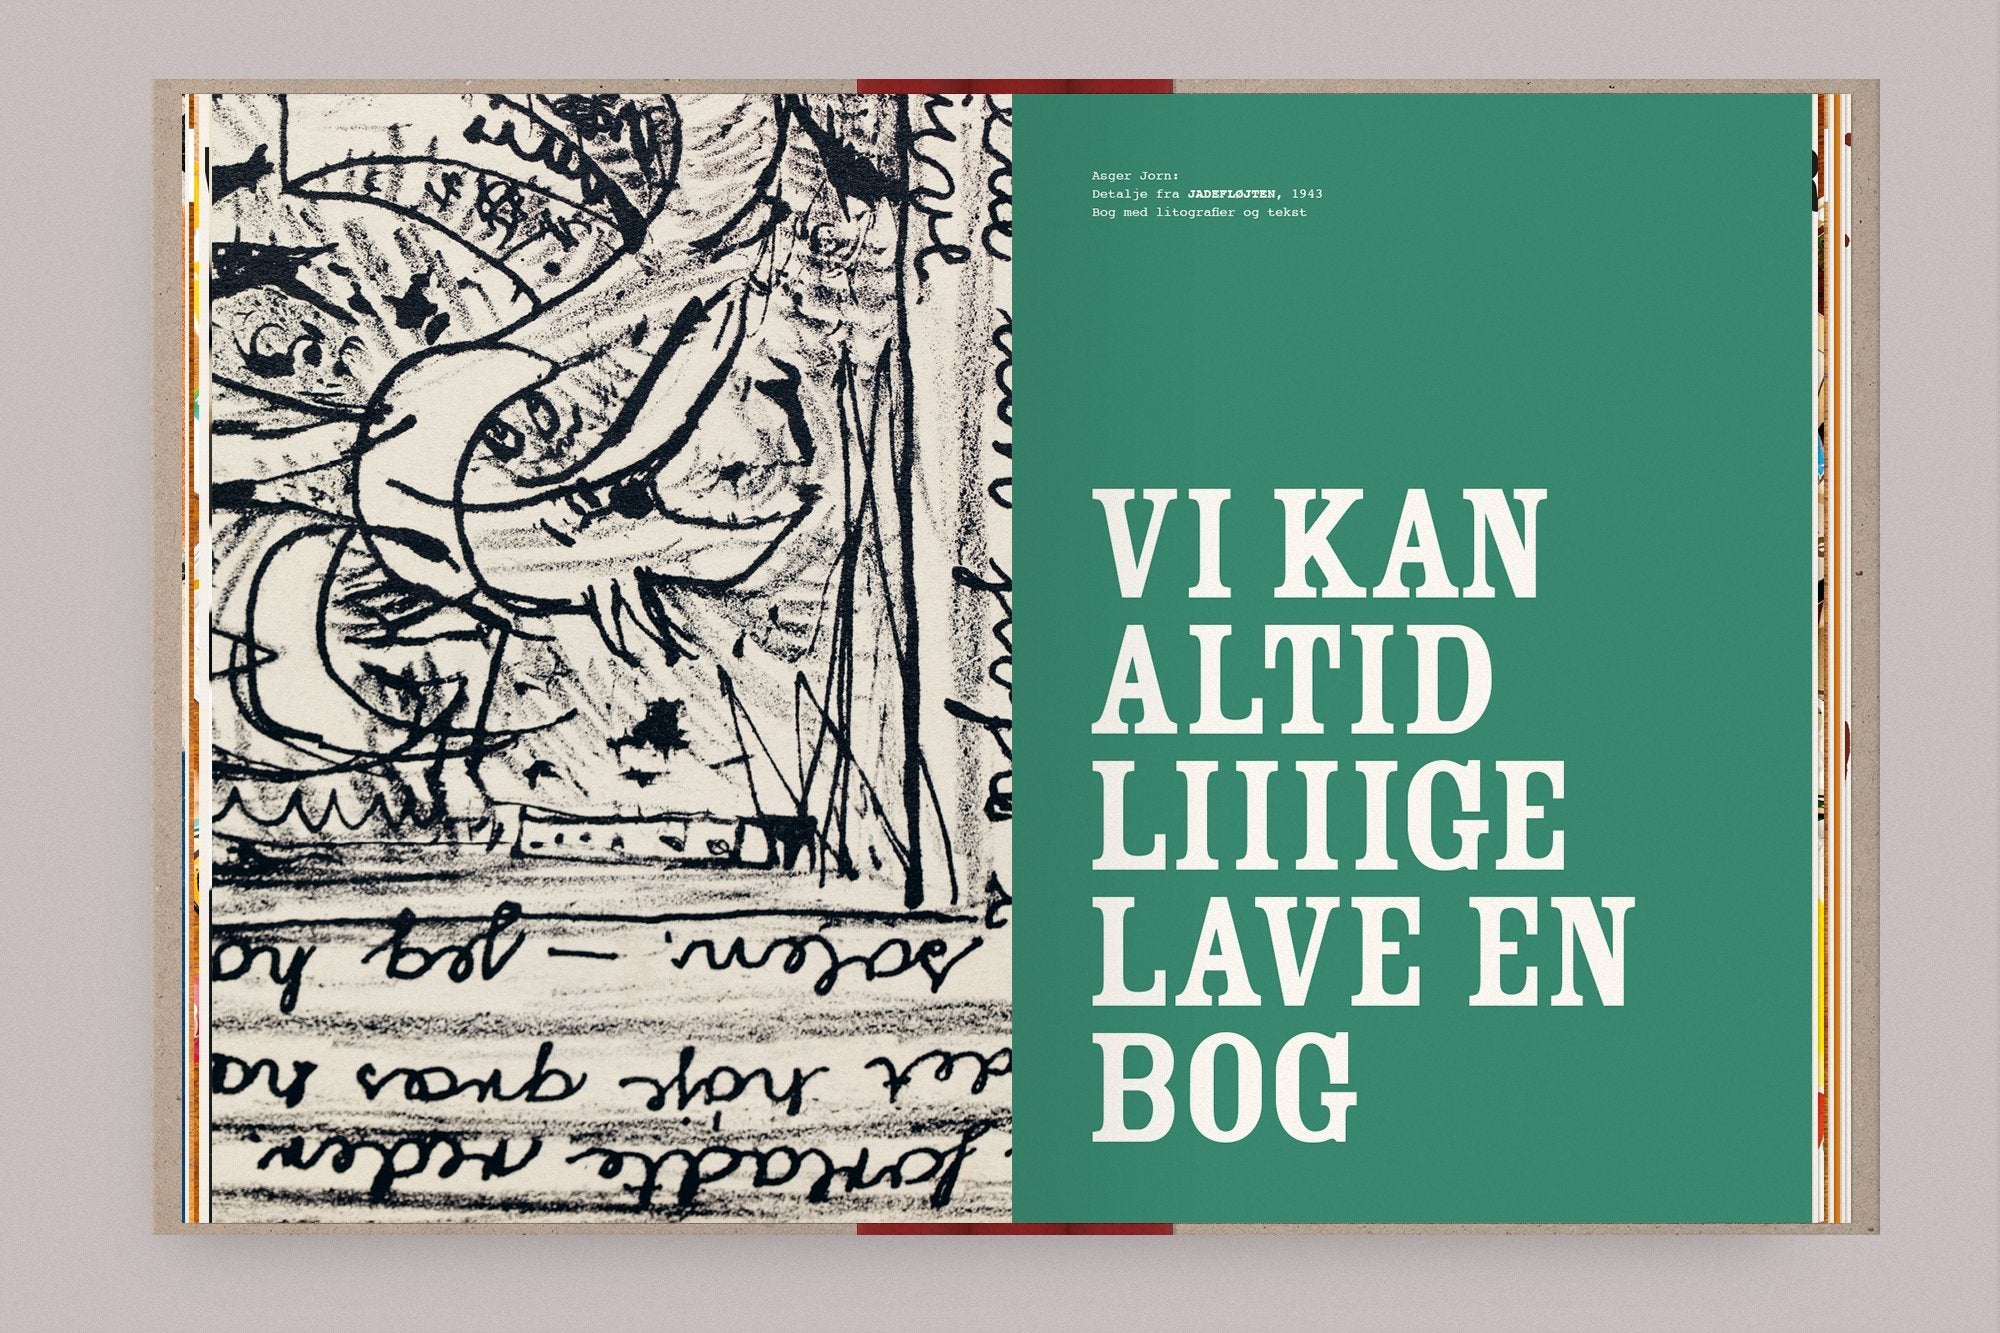 100 Asger Jorn | Experiments · €18 · ASGER JORN | CURATED BY EYEDS